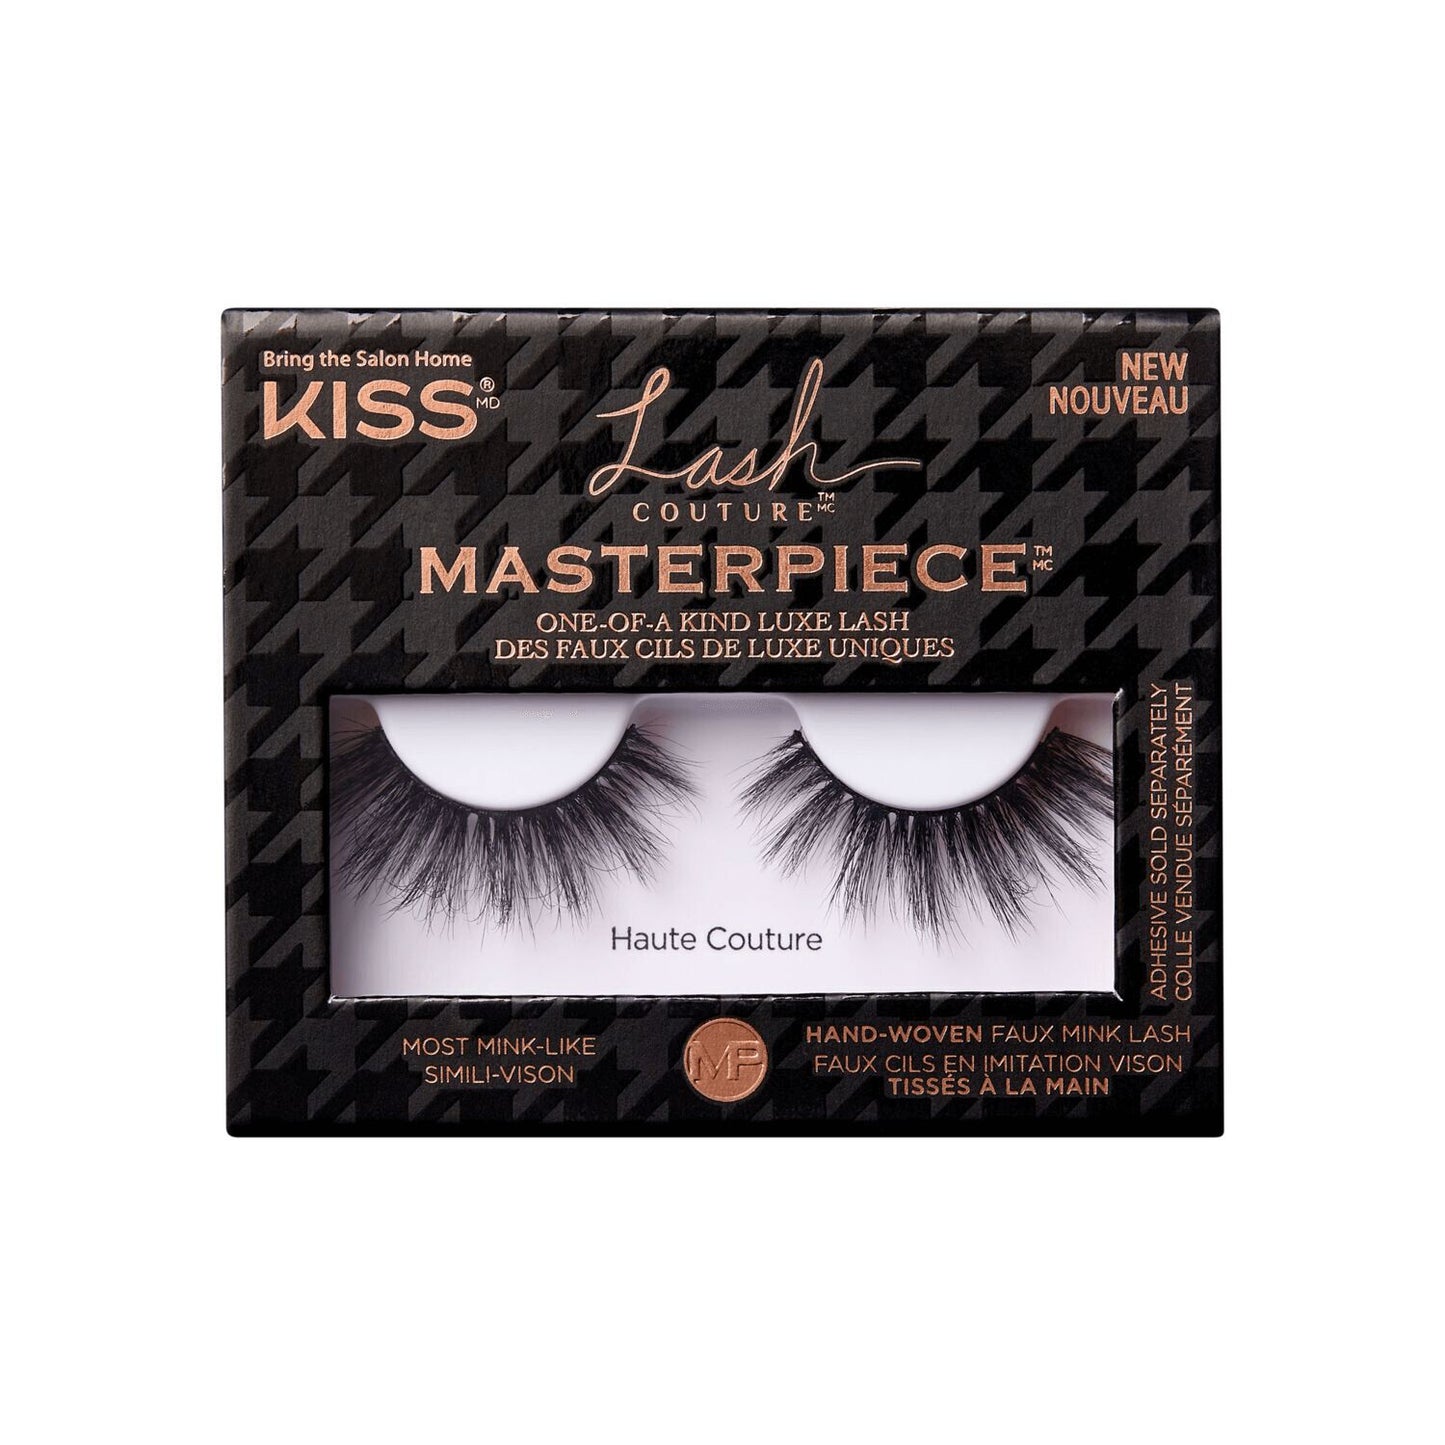 Lash Couture  by   KISS Lash Couture Masterpiece Fake Eyelashes - Haute Couture